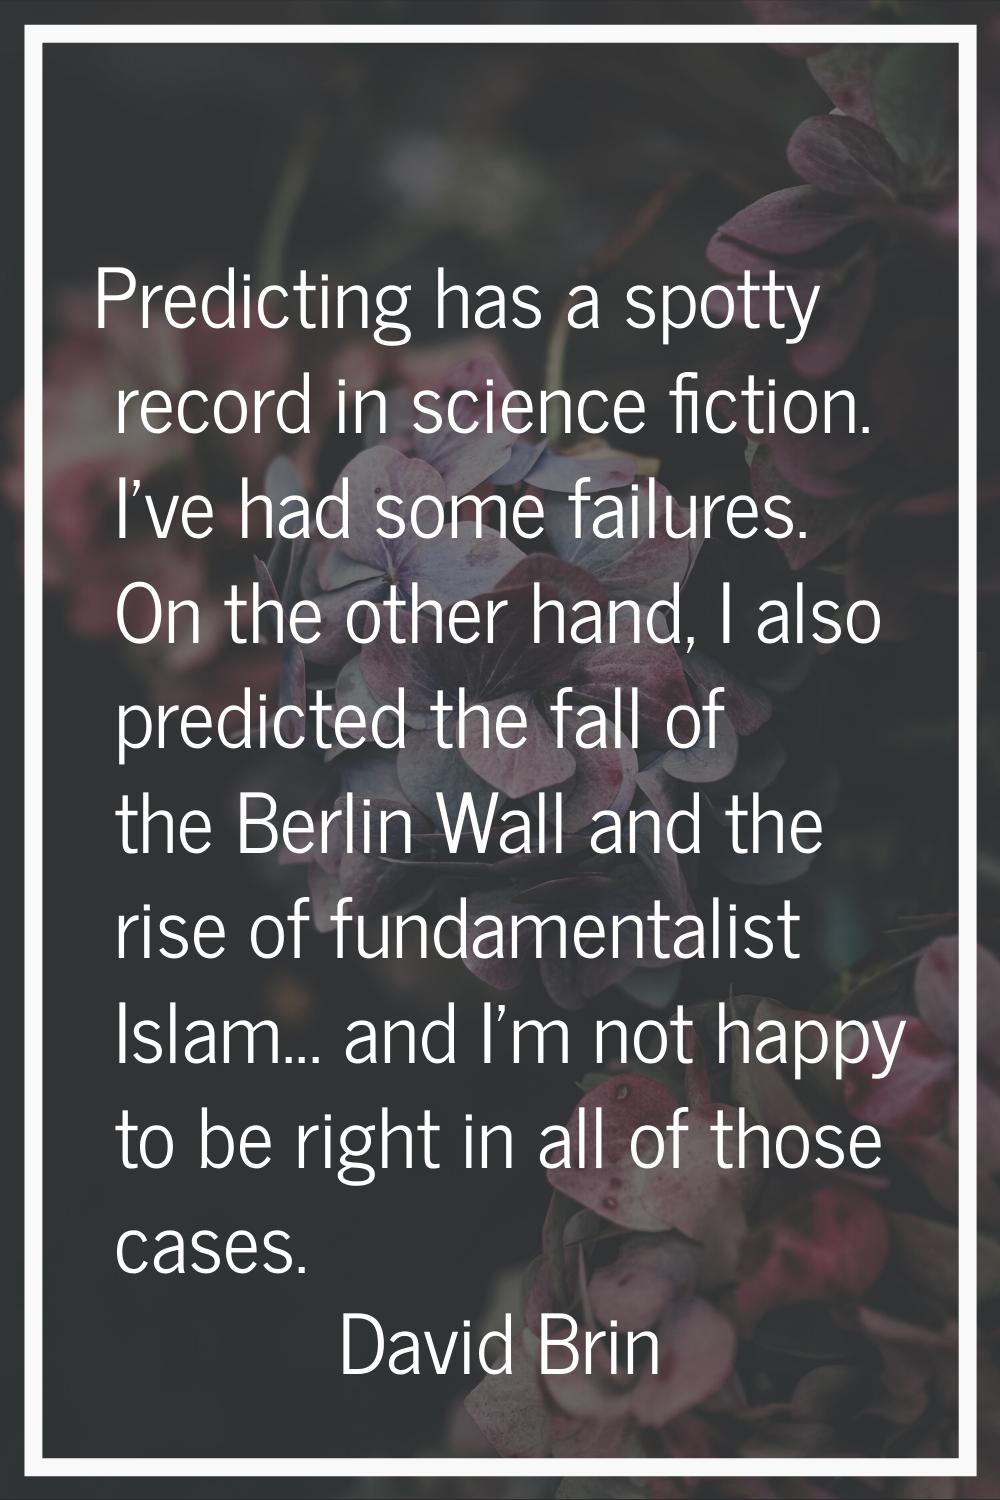 Predicting has a spotty record in science fiction. I've had some failures. On the other hand, I als